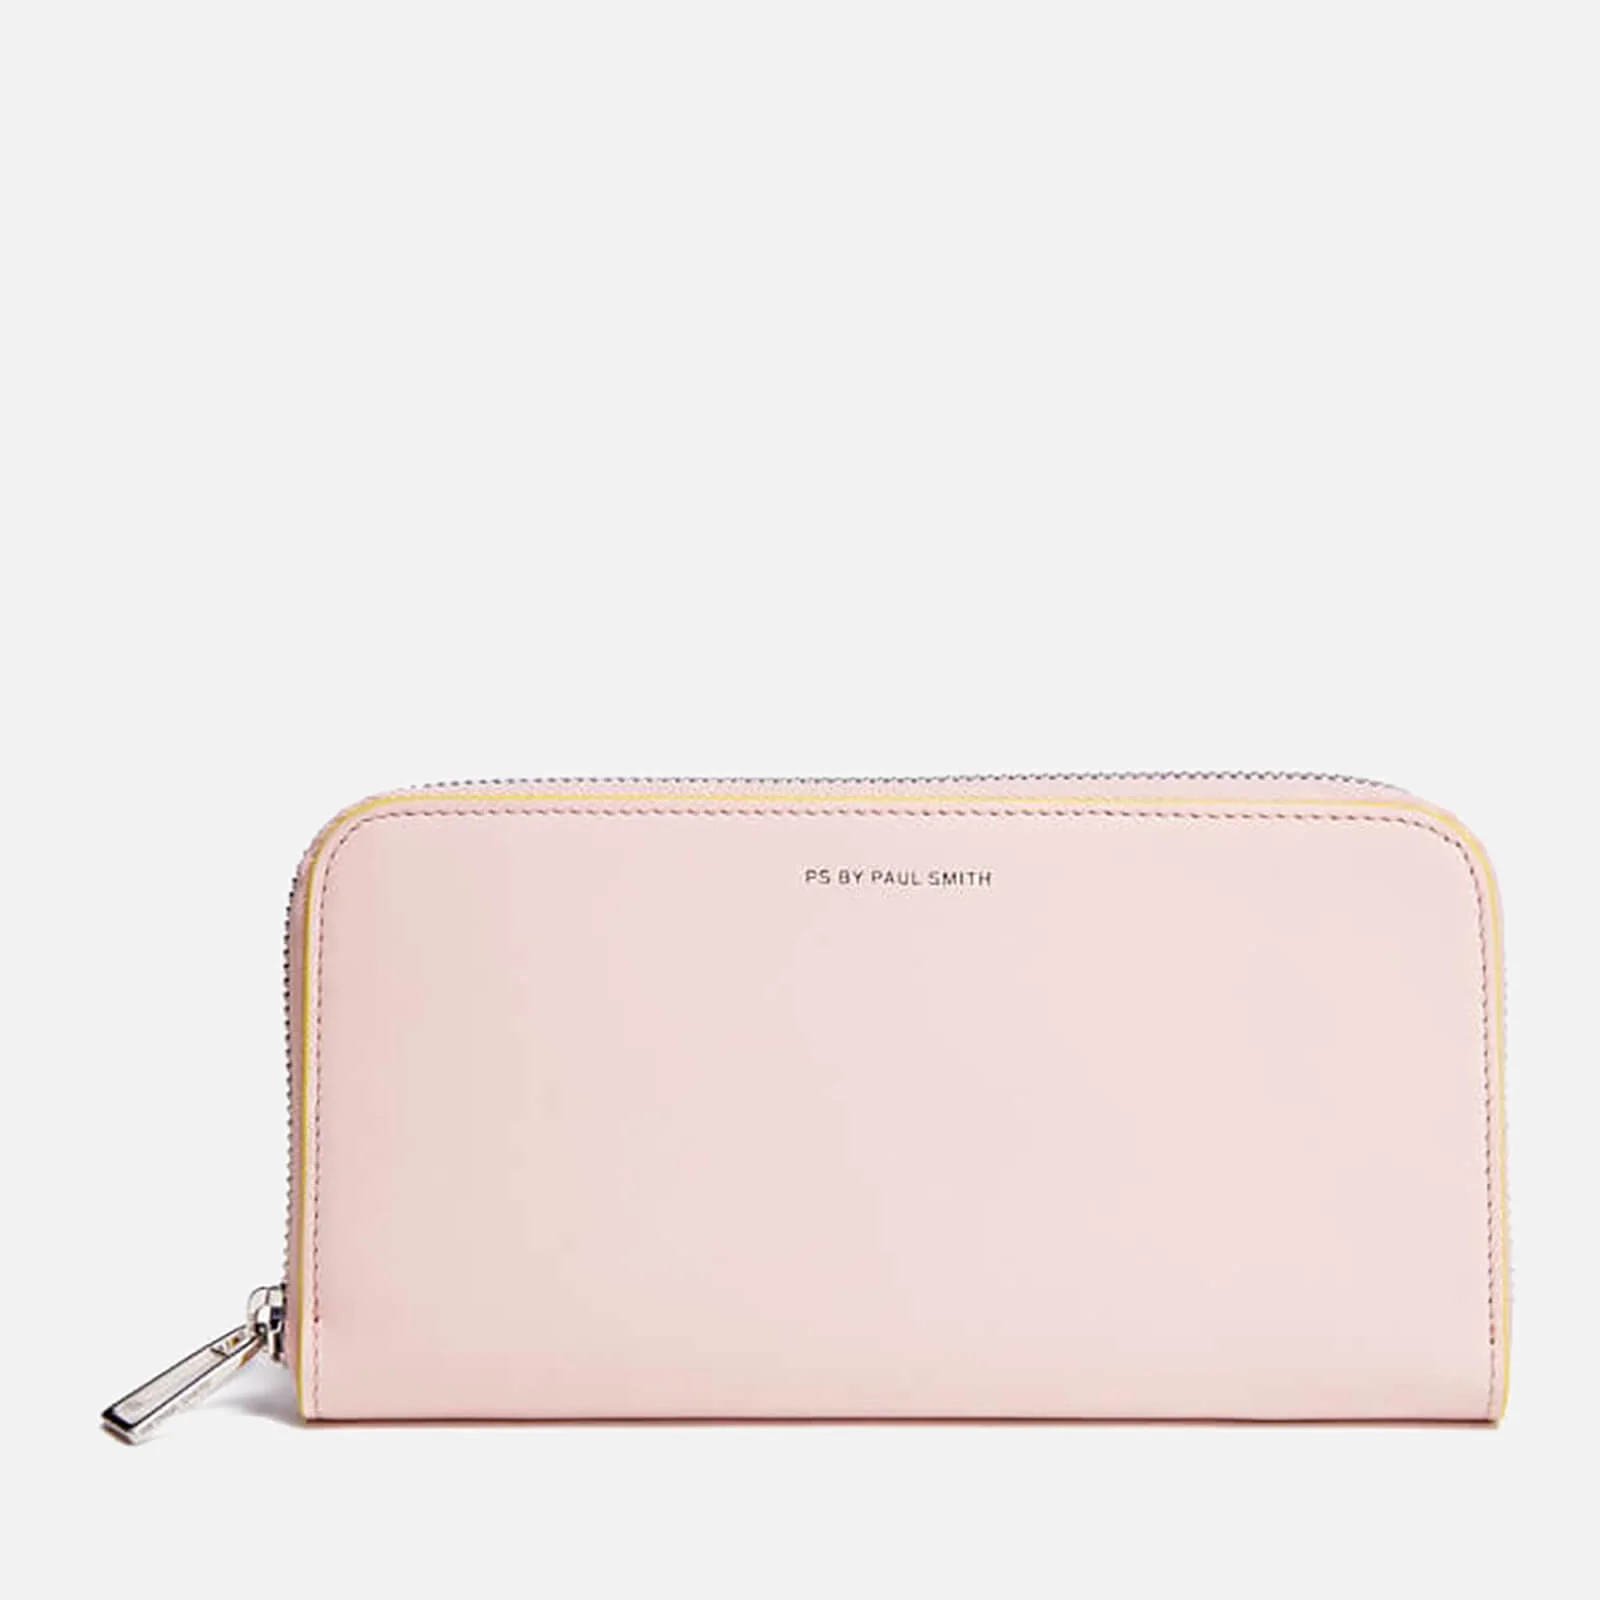 PS by Paul Smith Women's Large Zip Leather Purse - Blush Image 1